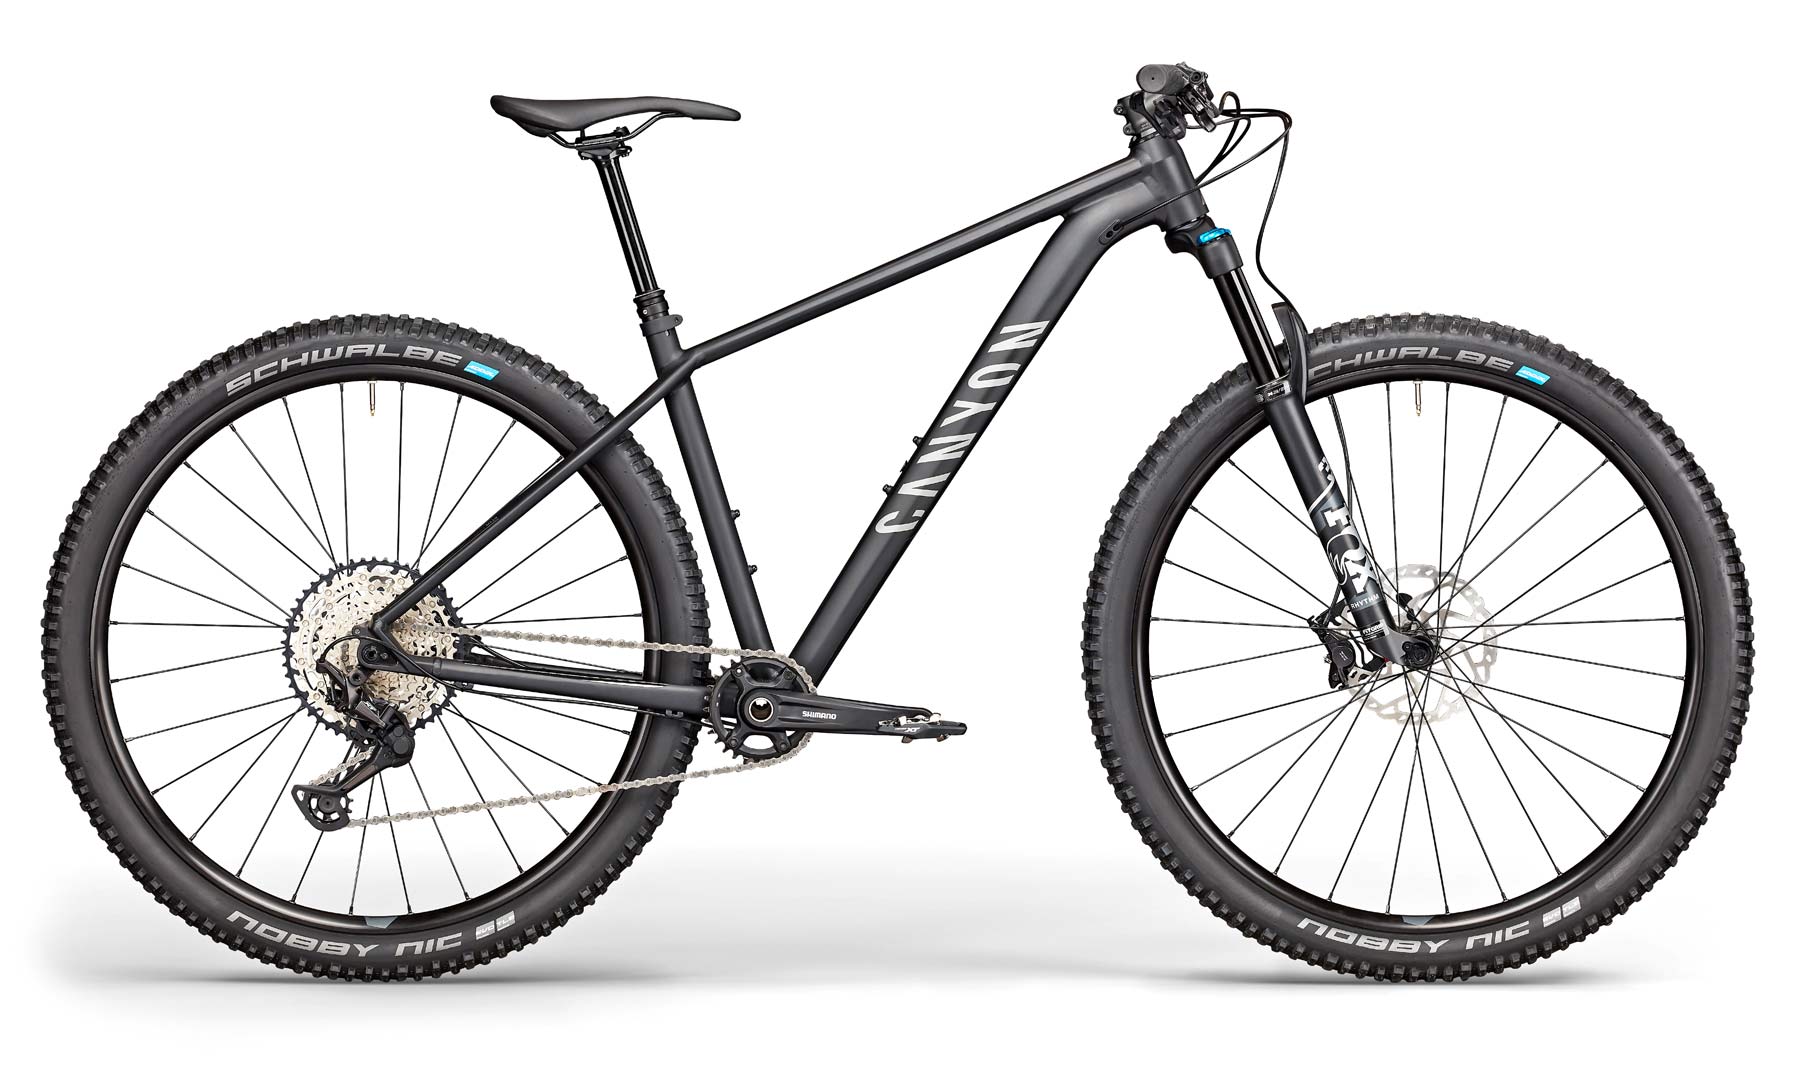 2021 Canyon Grand Canyon alloy MTB hardtail, updated affordable aluminum mountain bike trail hardtails